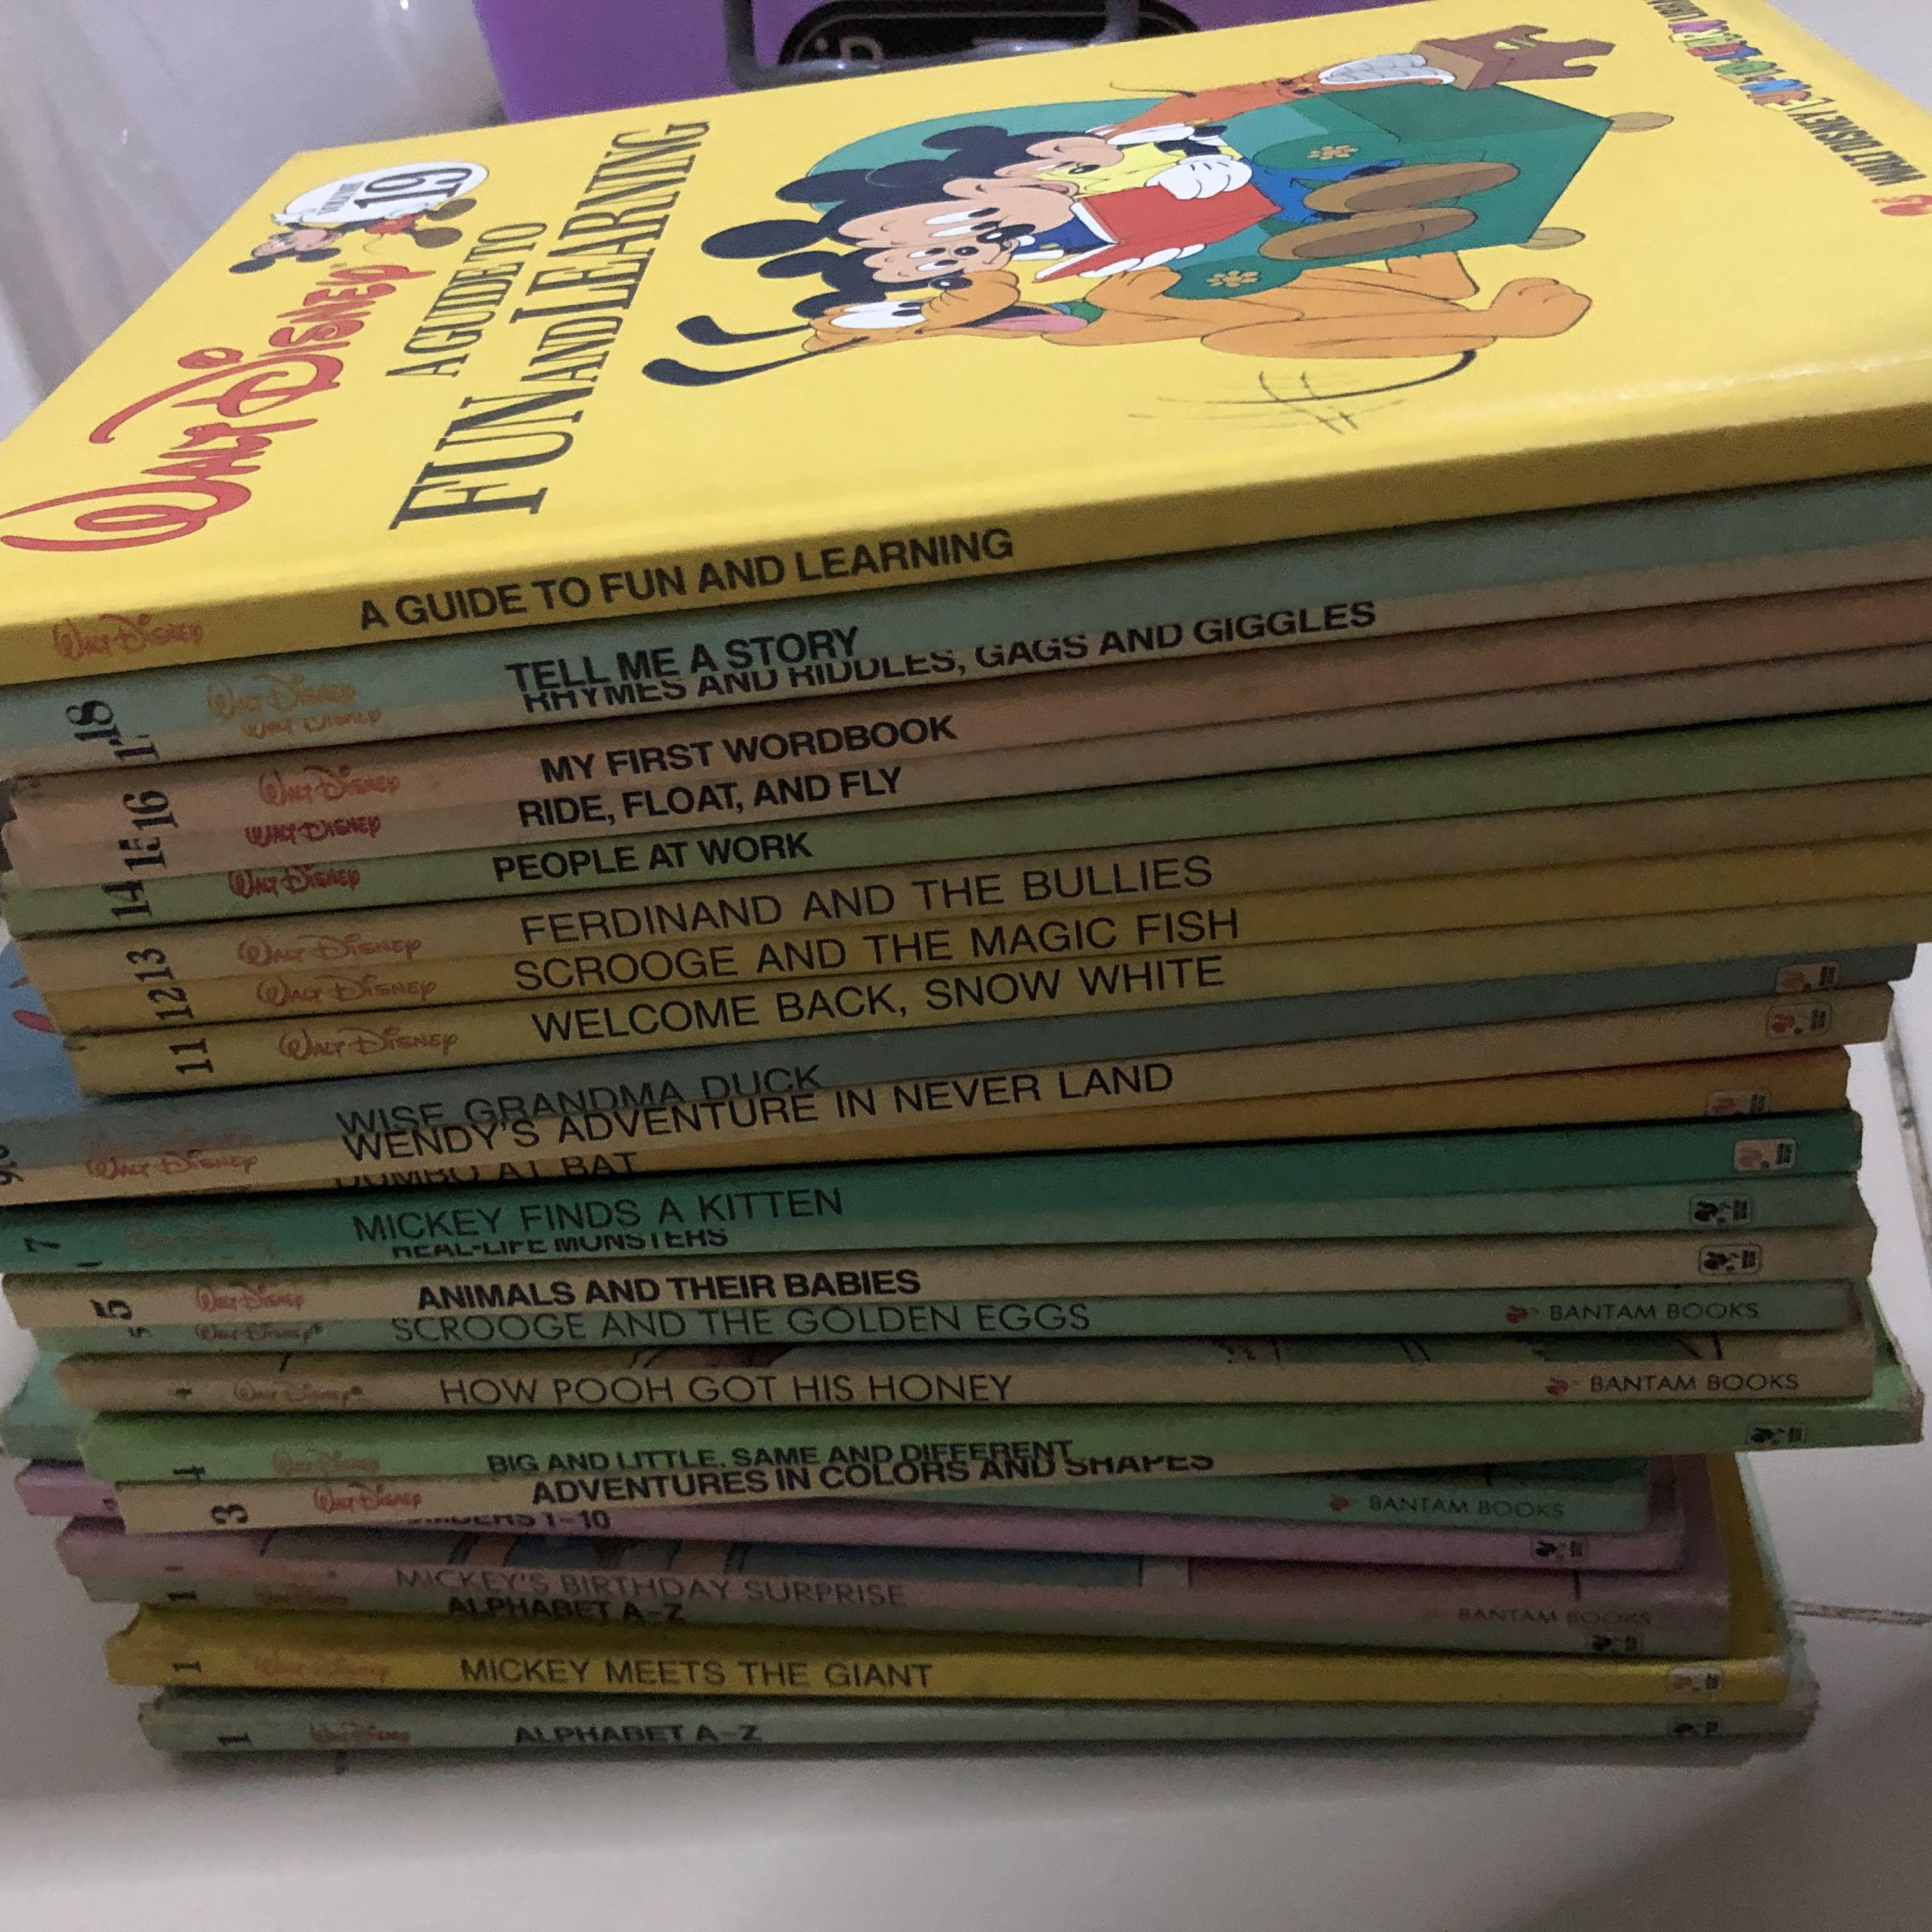 Hobbies　Young　collectible!,　library　Books　pcs　readers　Books　1983　25　Vintage　books　hardcover　vintage　walt　Toys,　disney　Children's　collection!　Magazines,　on　Carousell